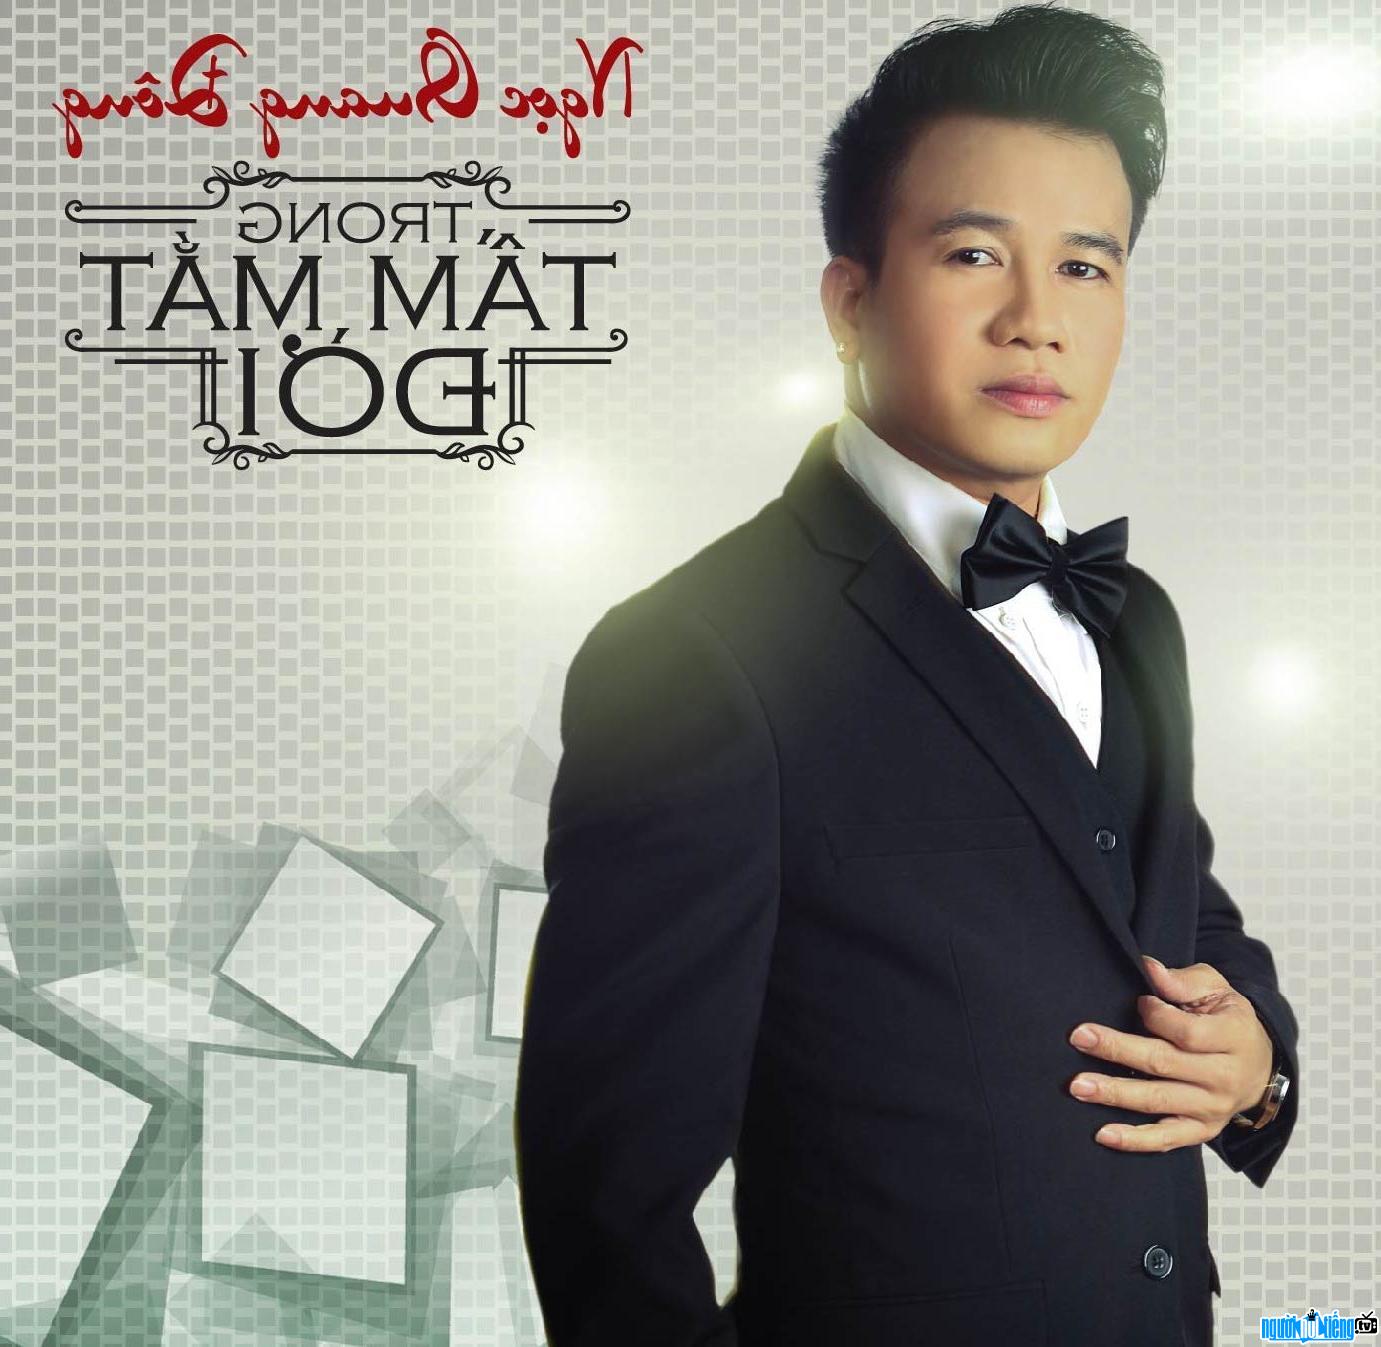  Ngoc Quang Dong in his recent album Vol 2 In the sight of life